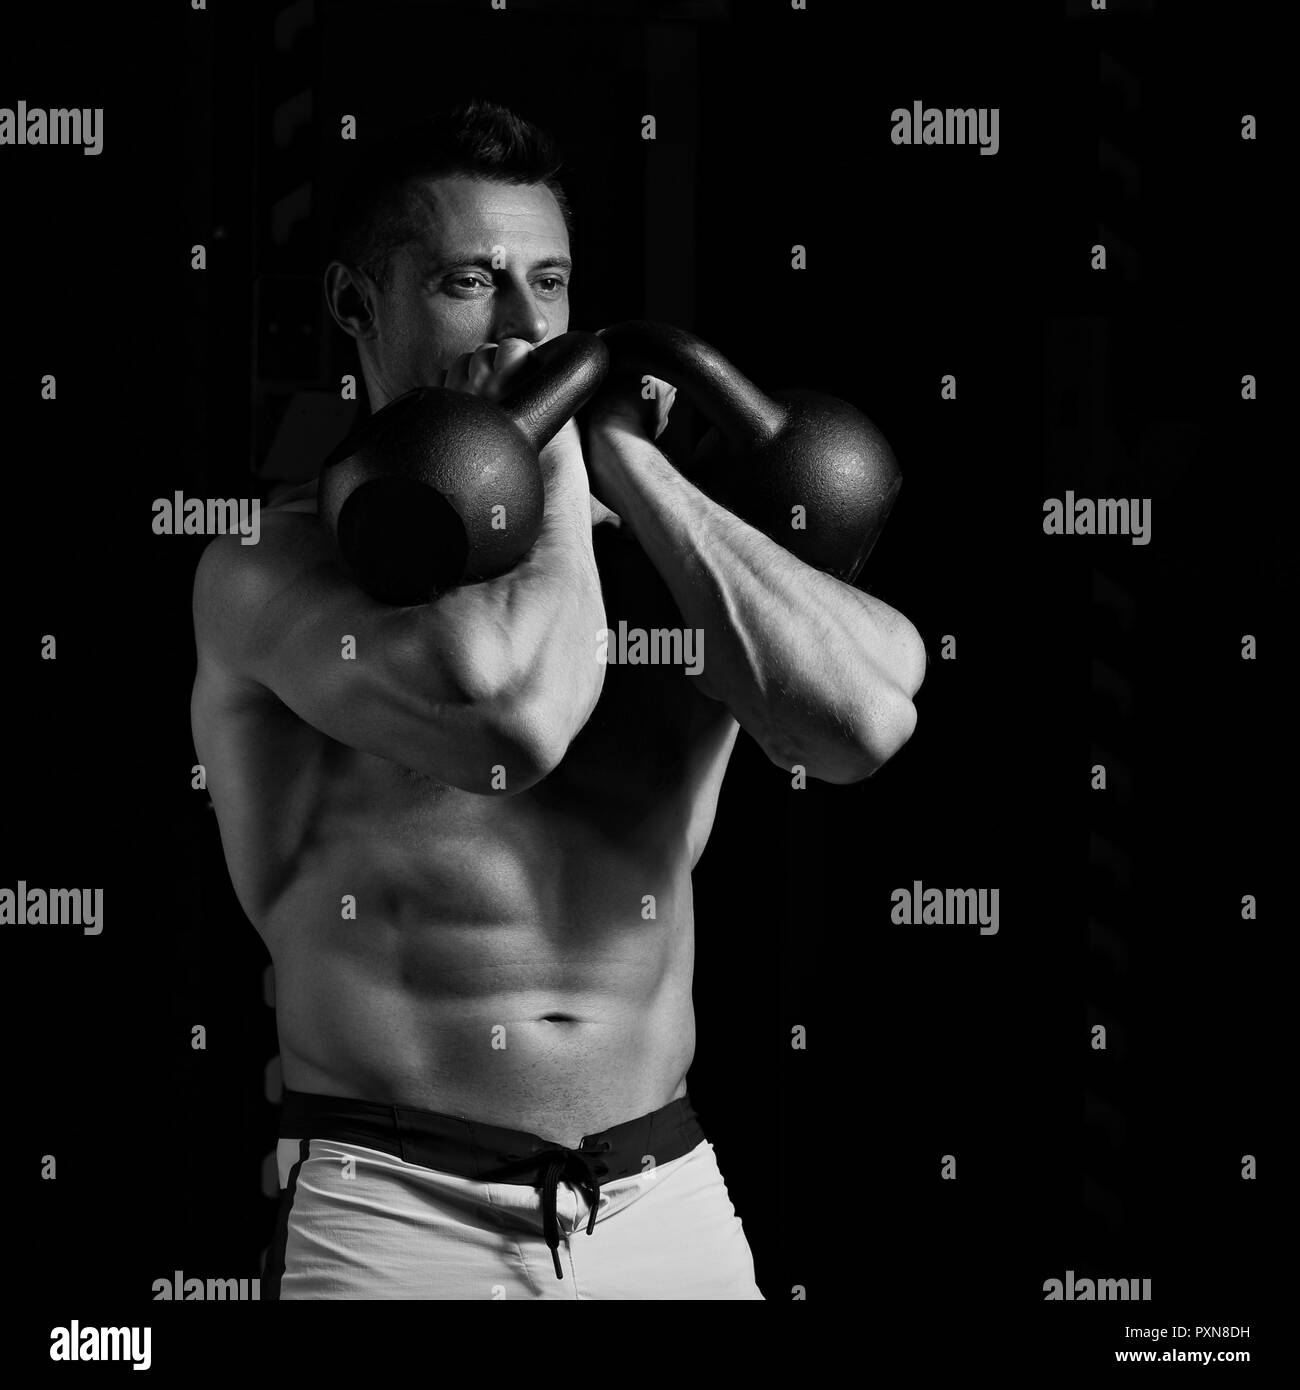 Handsome strong man doing the exercises with kettlebells on dark shadow background. Closeup contrast portrait. Black and white Stock Photo